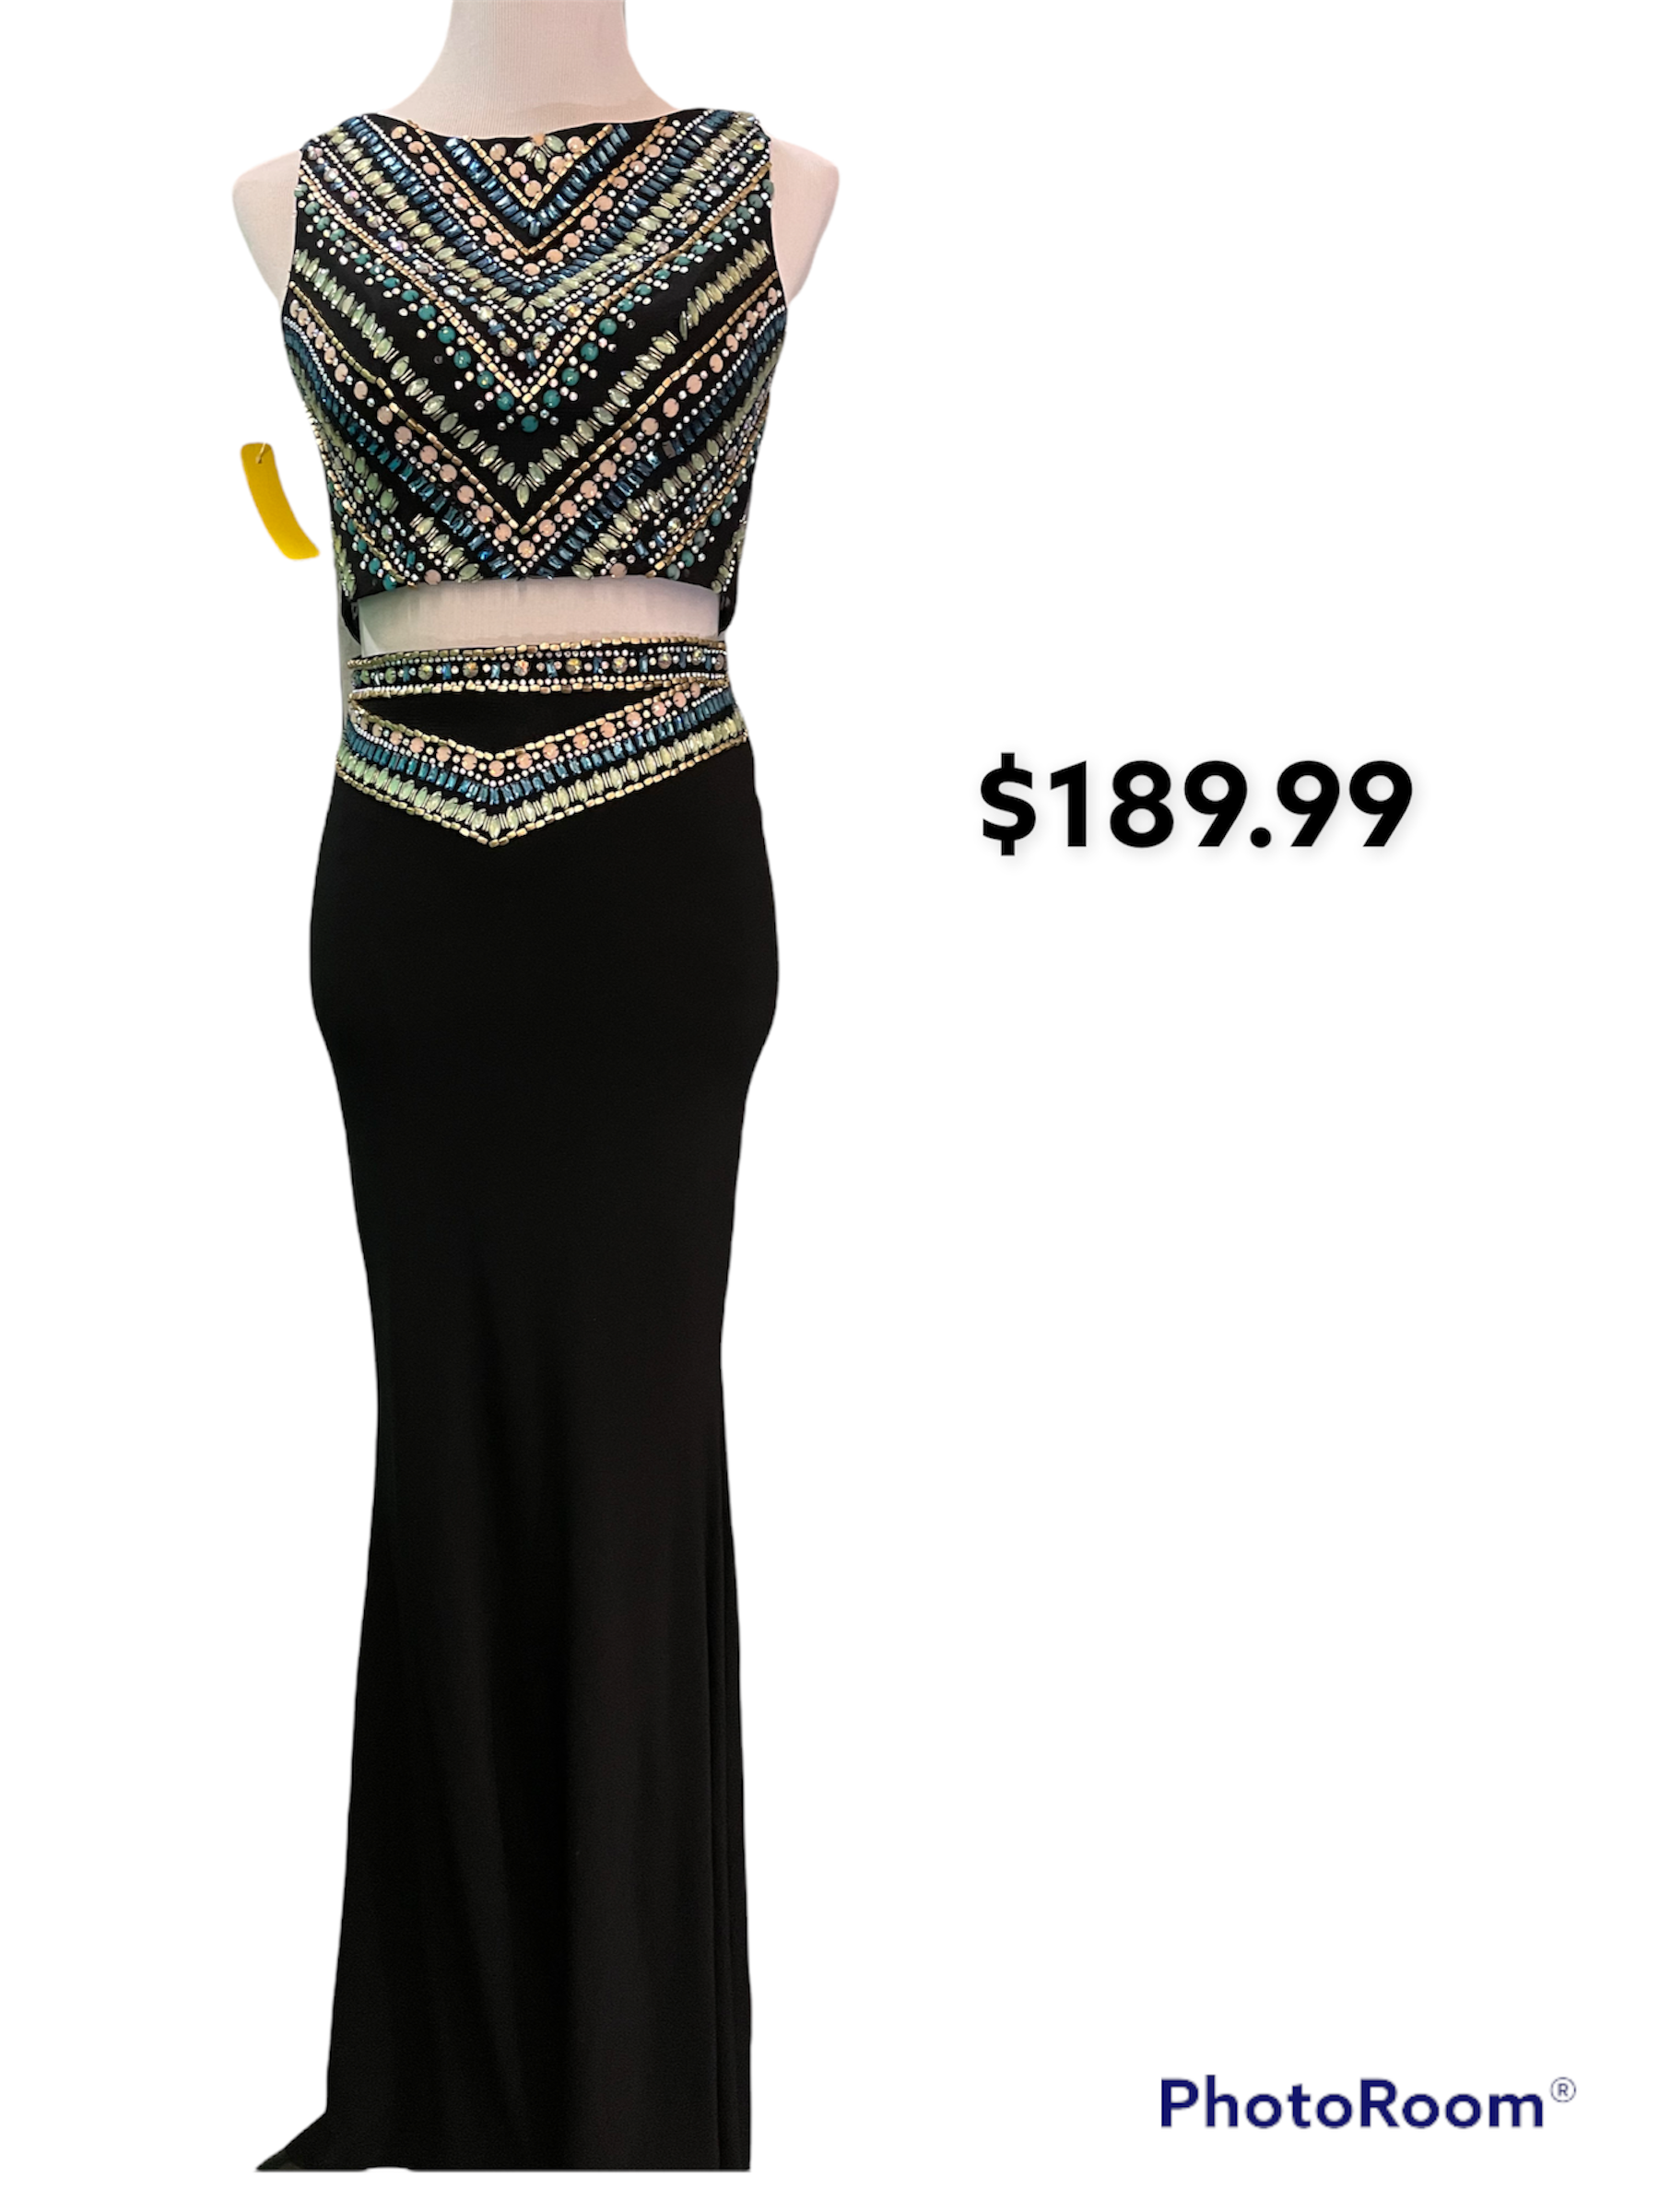 Mori Lee 2 Piece Prom
Black, blue and green
Size: 2